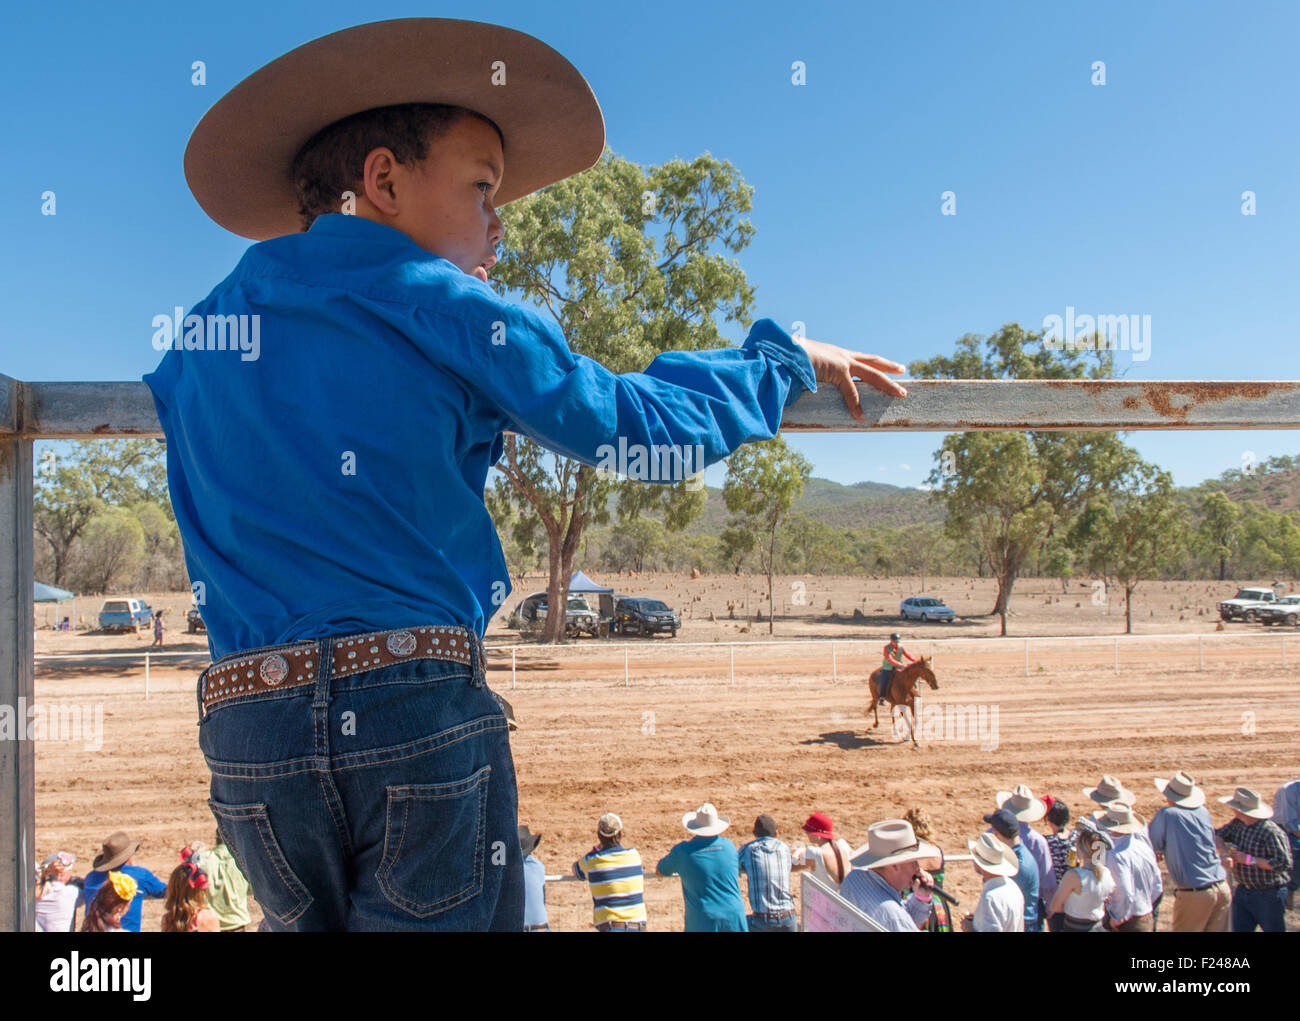 Young boy watching the bush races at the Eureka Creek Rodeo in late July, northern Queensland, Australia Stock Photo